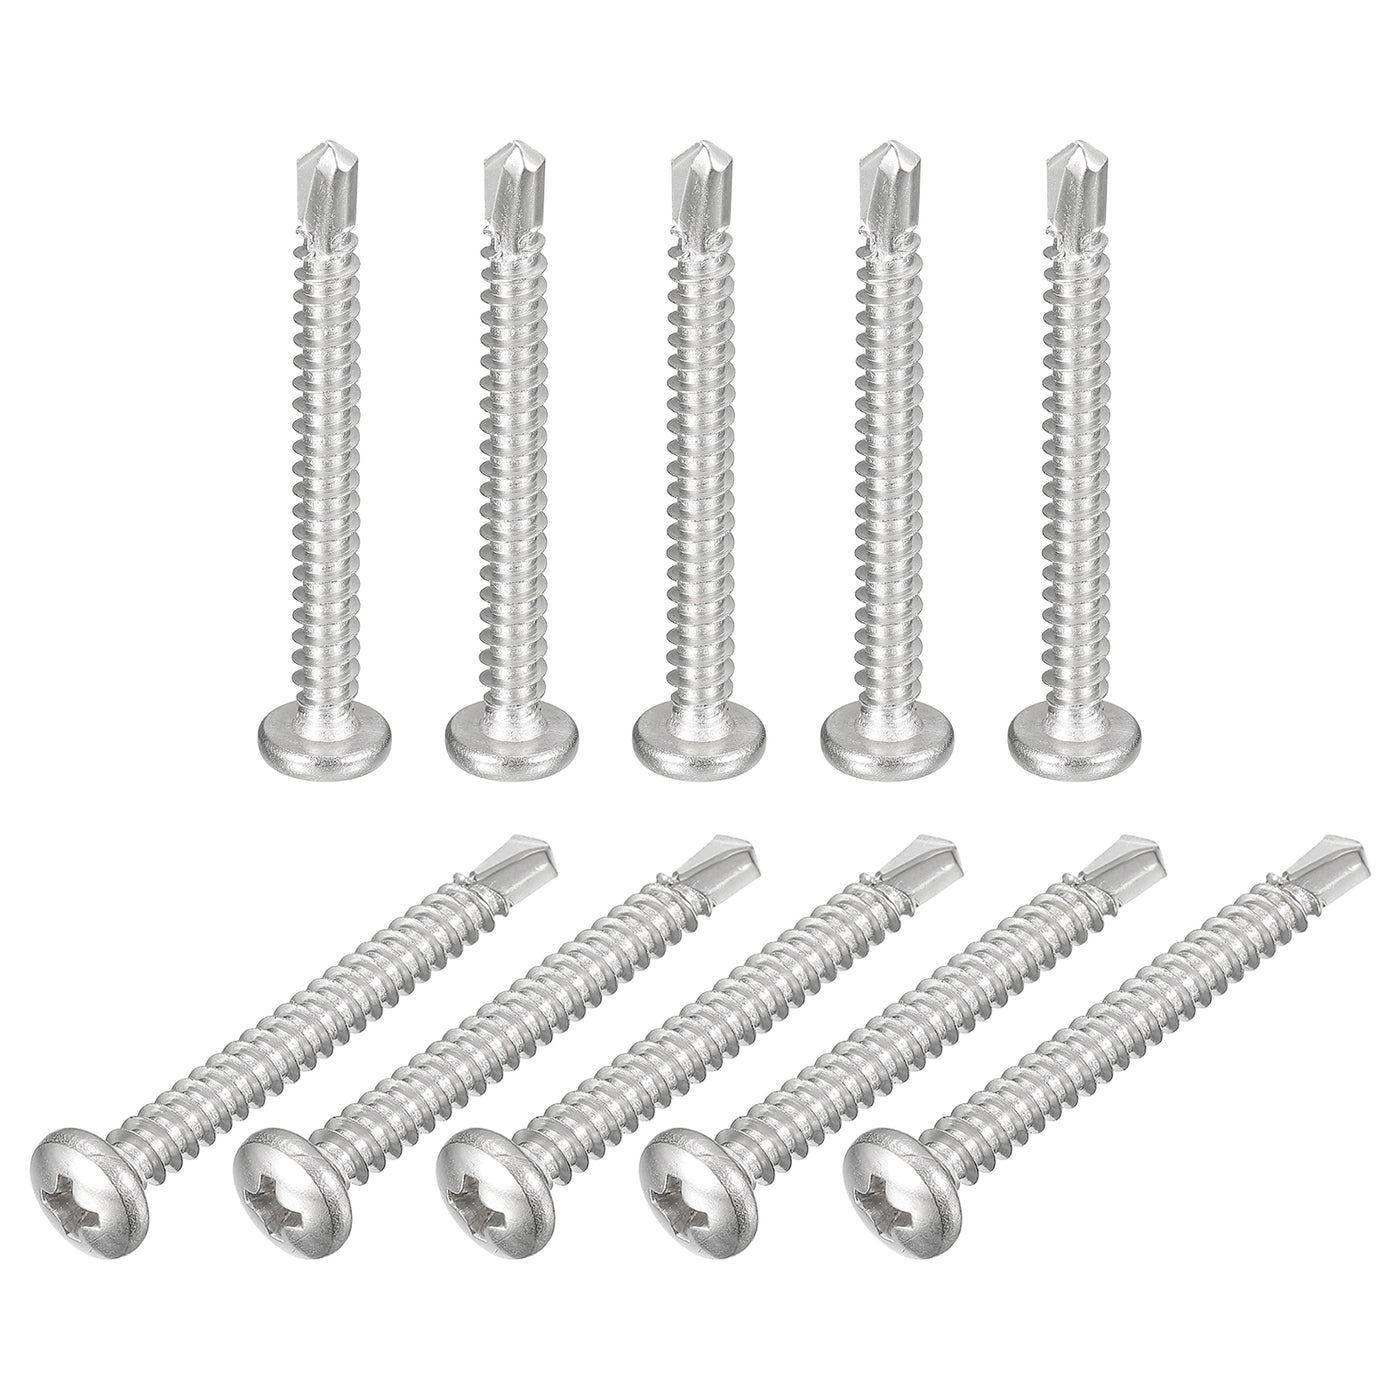 uxcell Uxcell #10 x 1-3/4" Self Drilling Screws, 20pcs Phillips Pan Head Self Tapping Screws